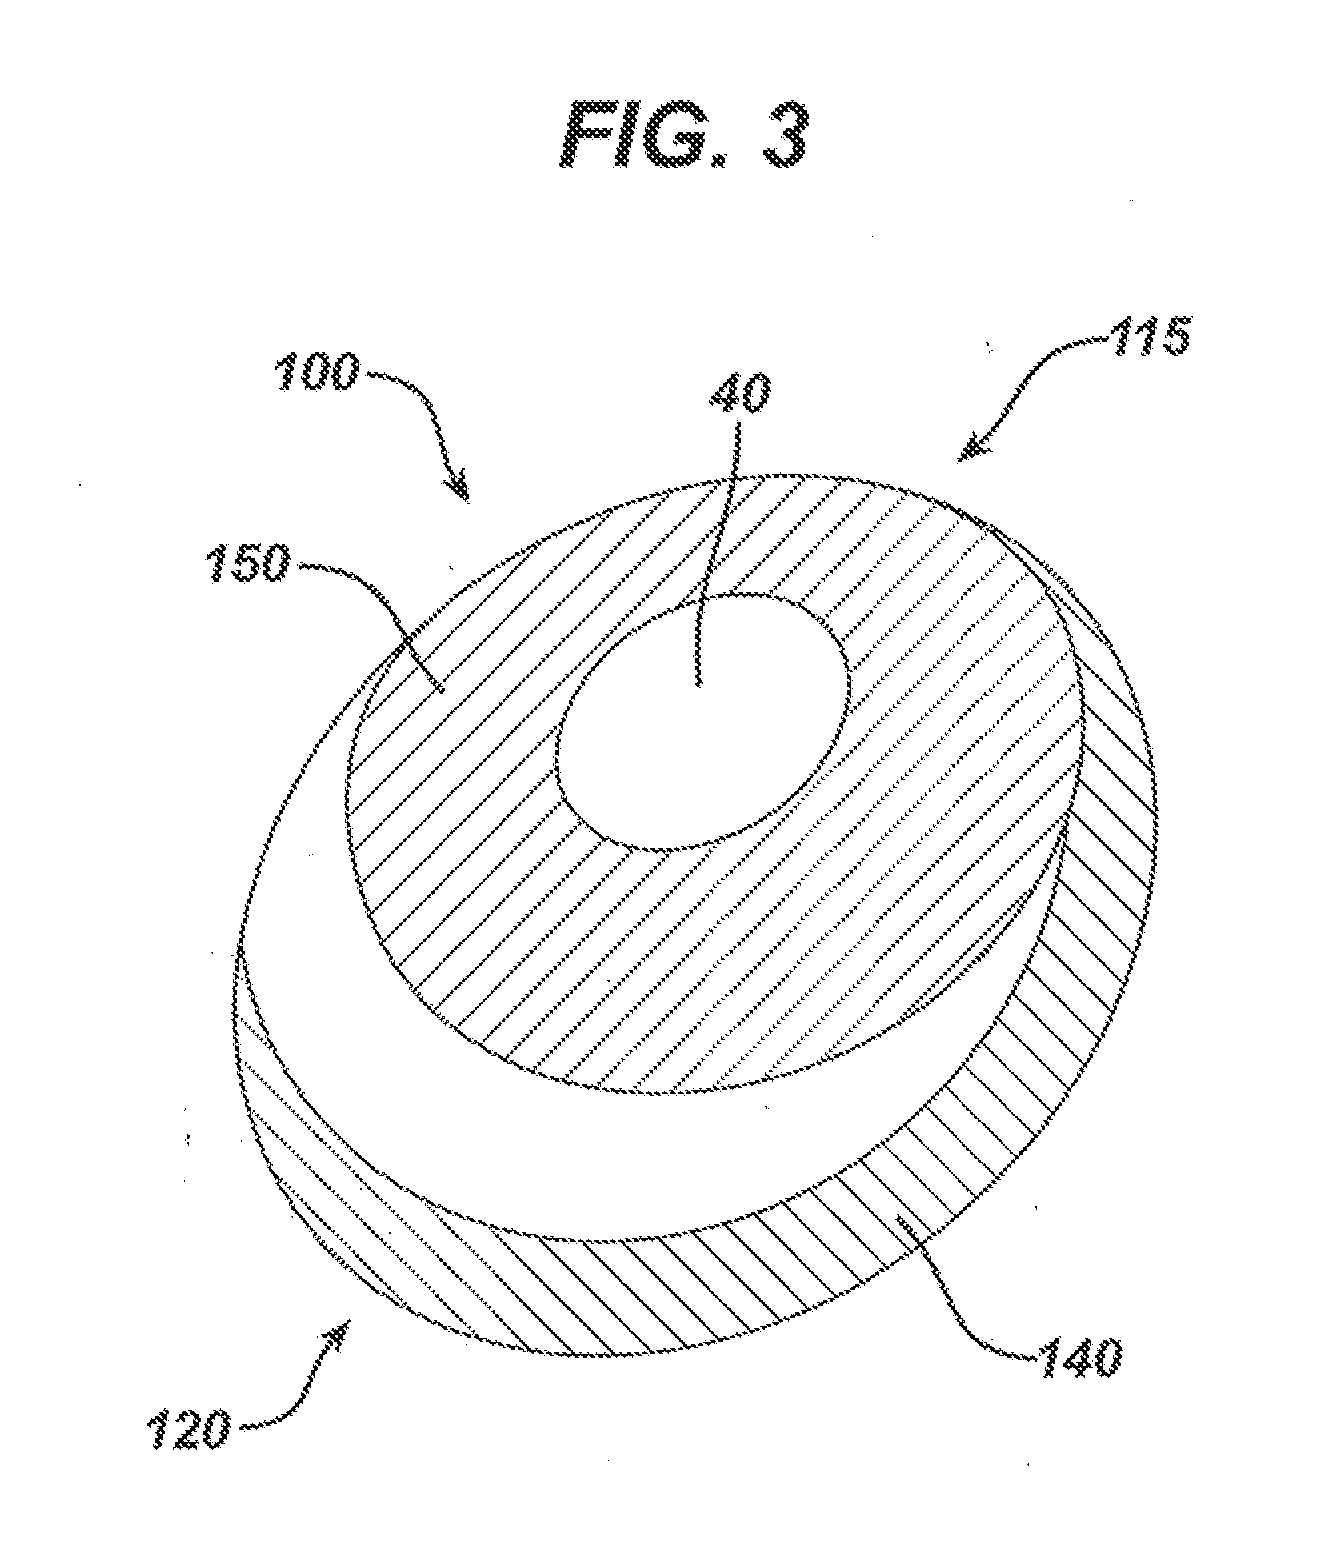 Directional Tissue Expander